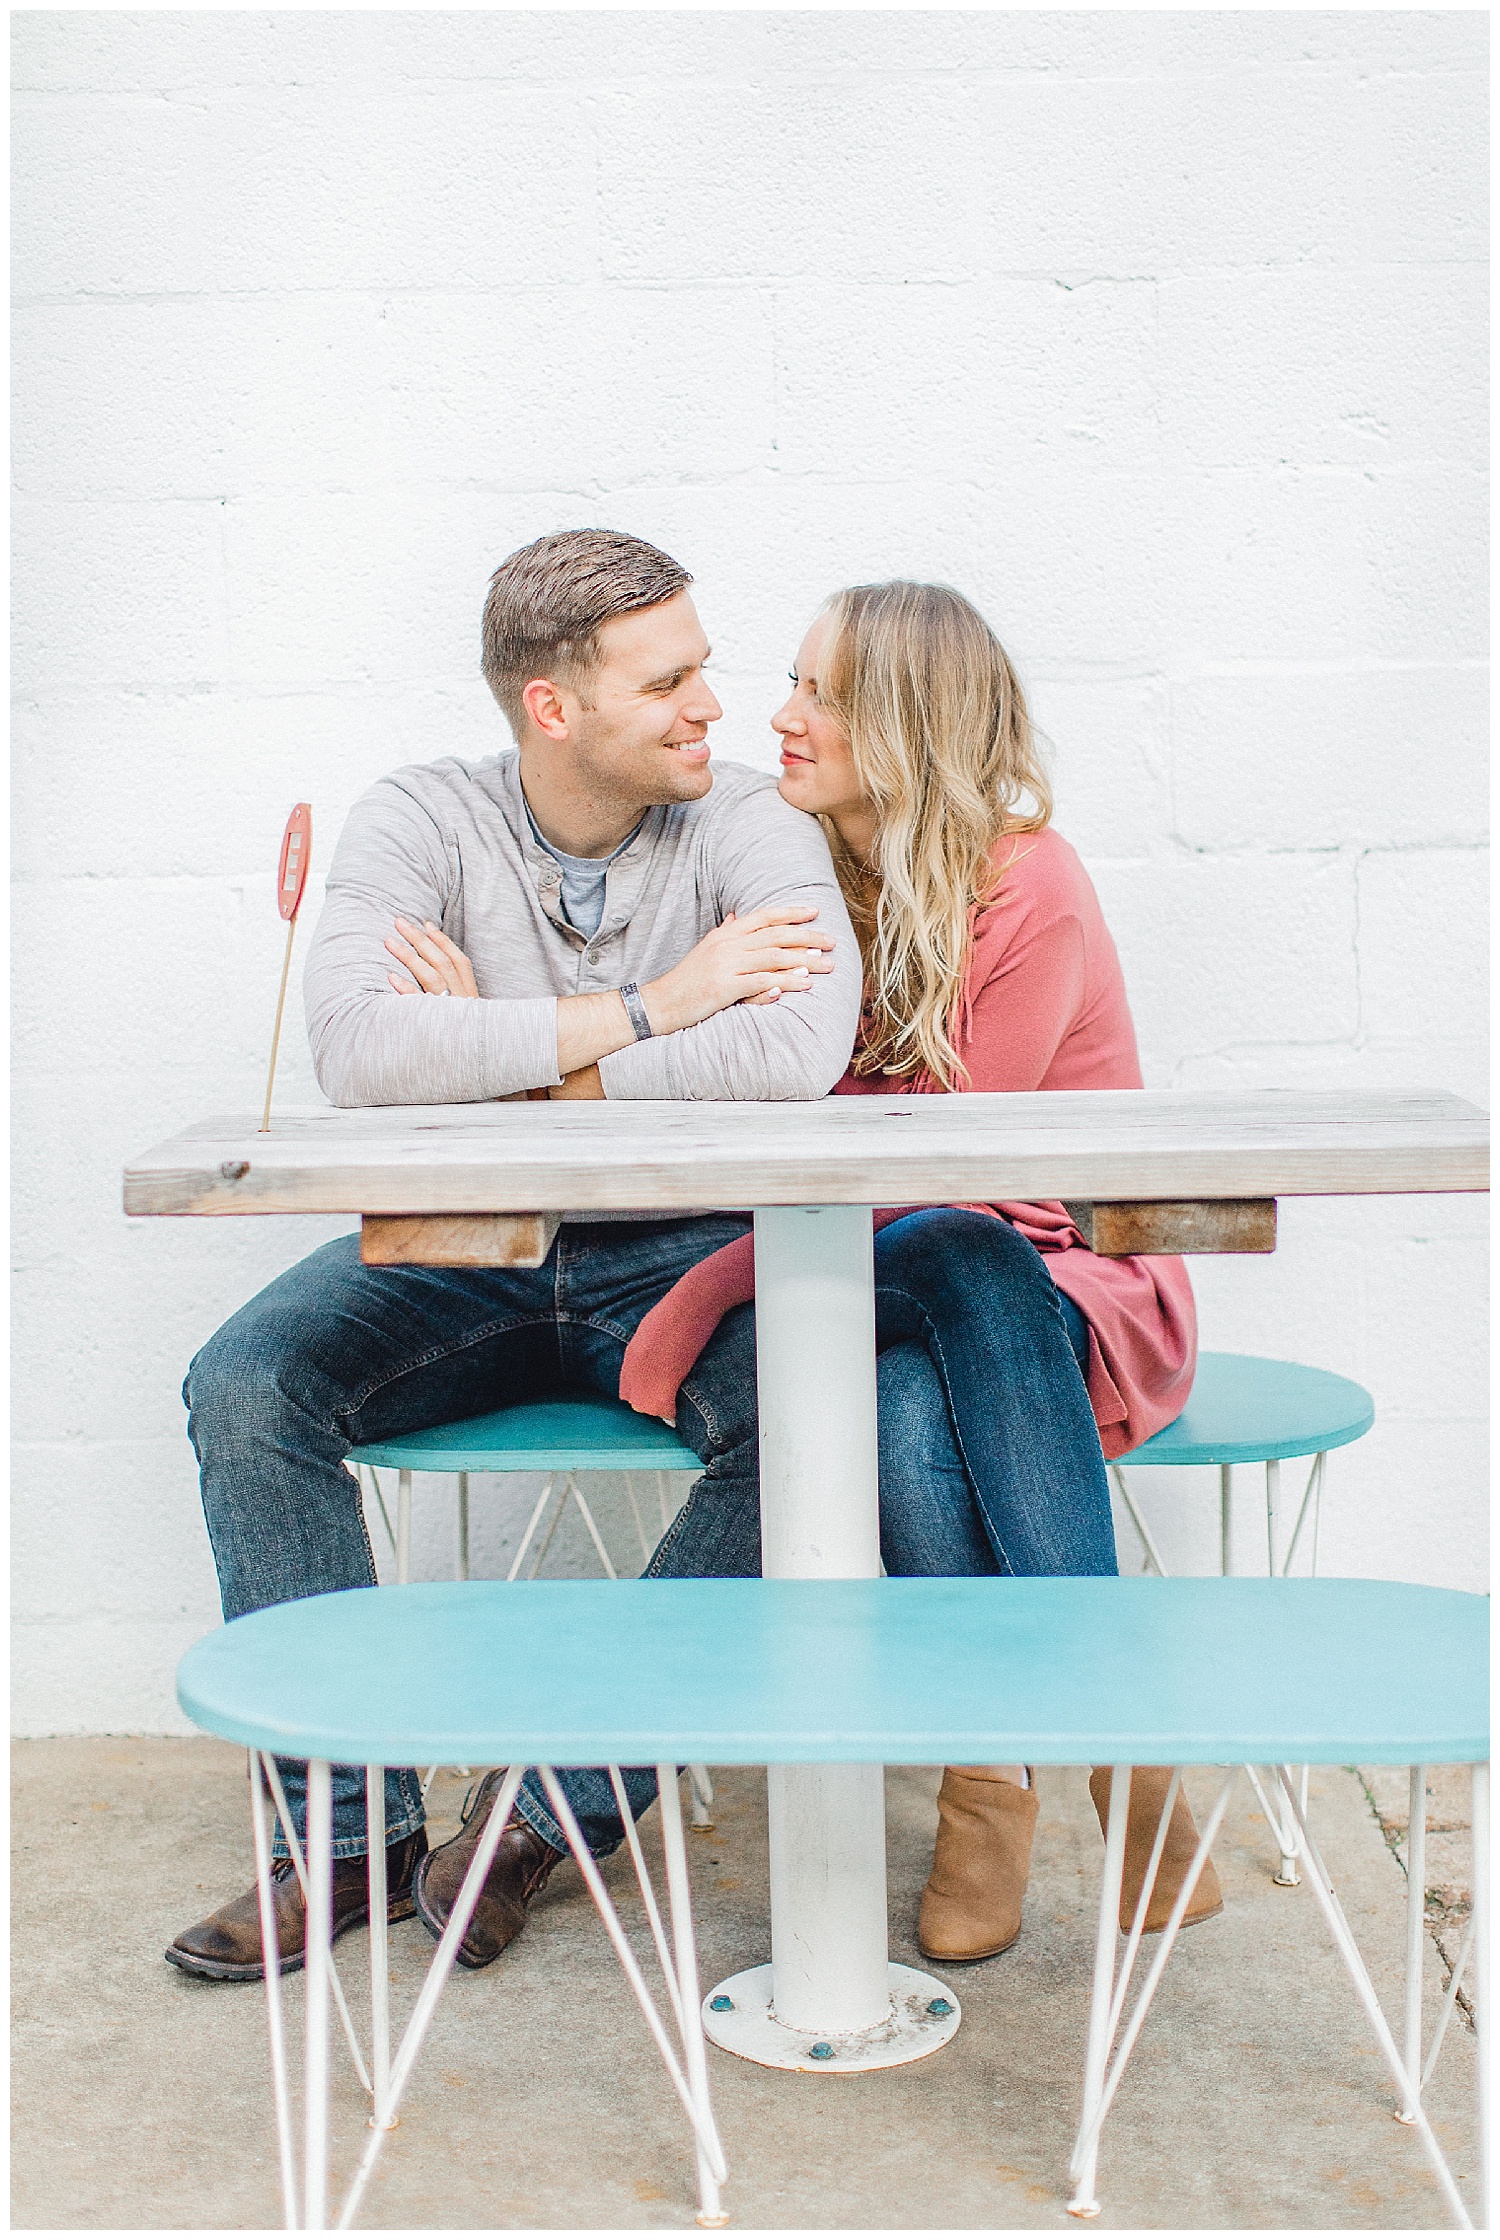 ERC_0795_Downtown Nashville Engagement Session at Barista Parlor | Emma Rose Company Wedding Photographer | Outfit Inspiration for Engagement Session | Kindred Light and Airy Photographer.jpg